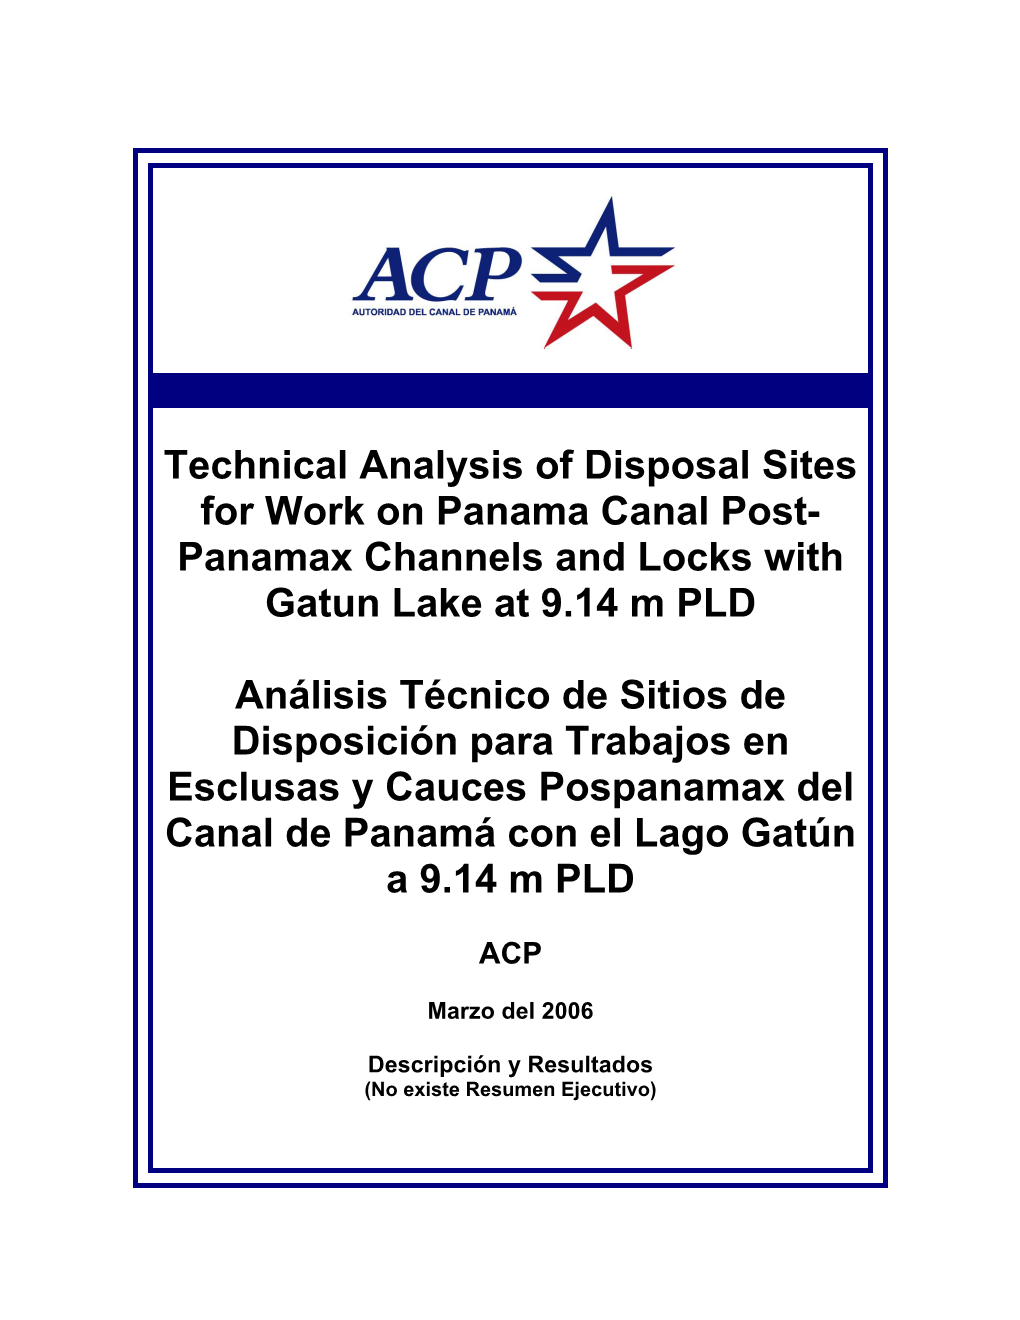 Technical Analysis of Disposal Sites for Work on Panama Canal Post- Panamax Channels and Locks with Gatun Lake at 9.14 M PLD An